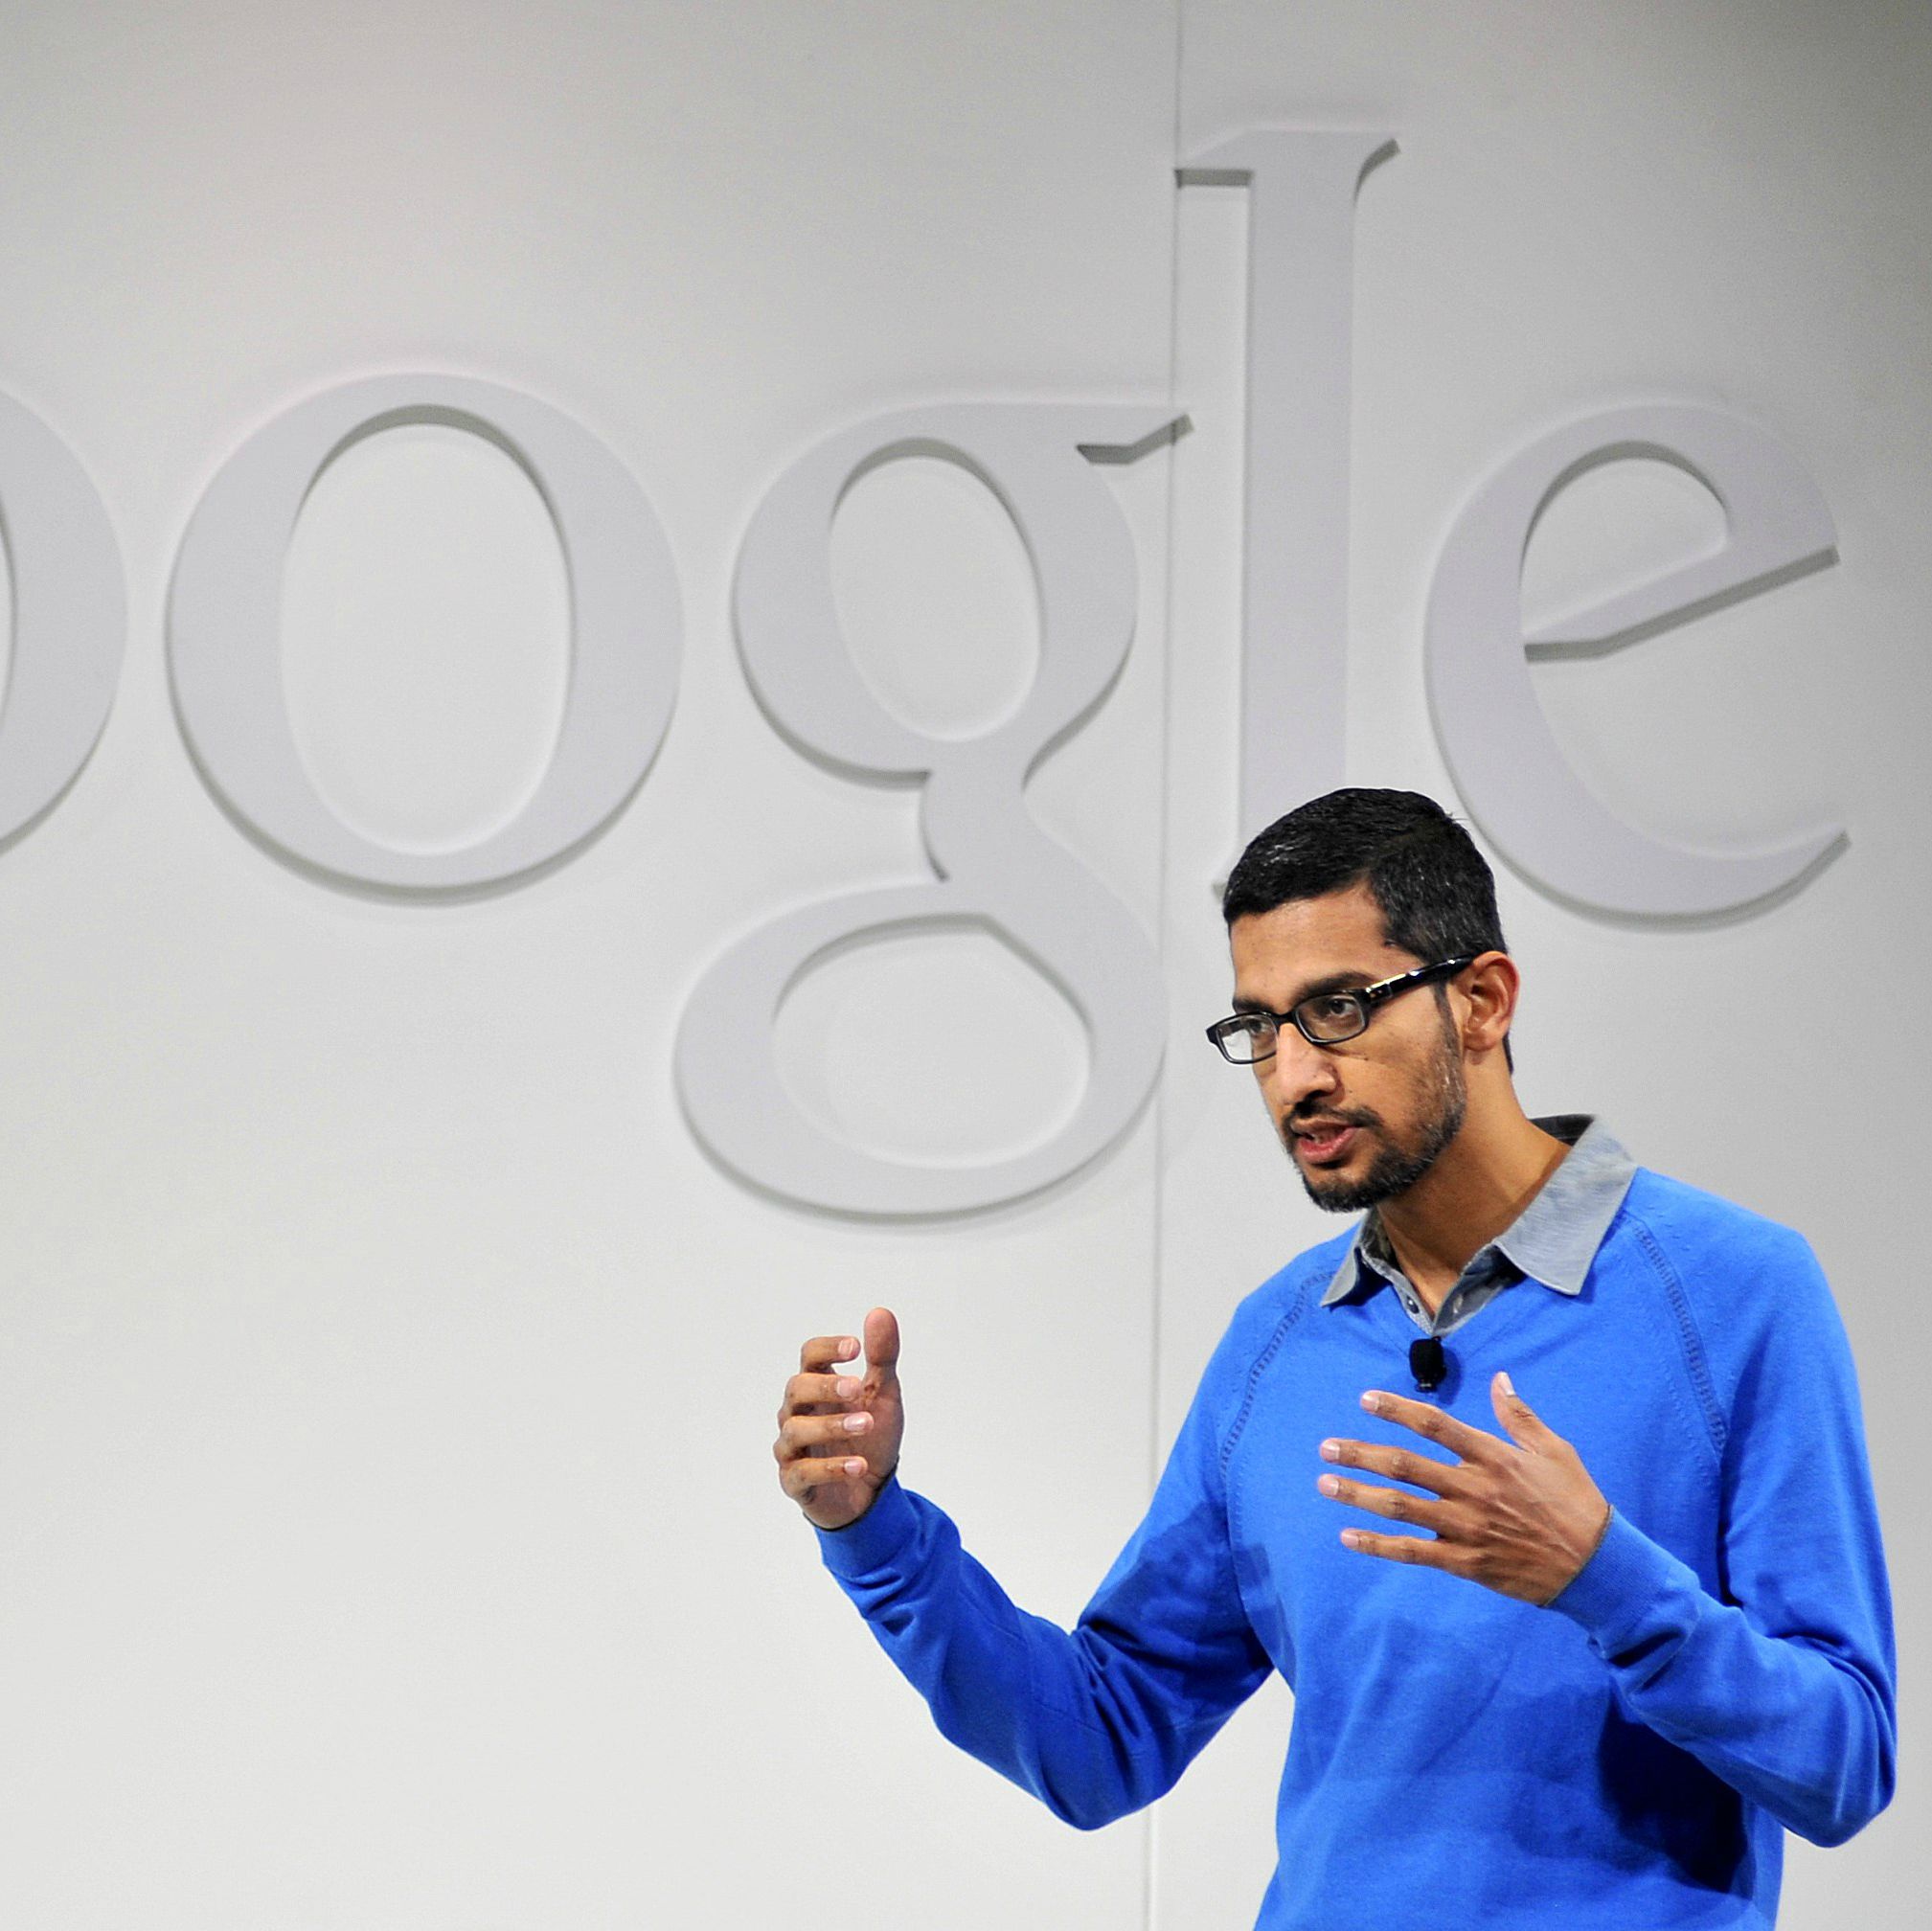 India will play big part in  driving technology forward, says Google CEO Sundar Pichai : Report - Daily News Analysis